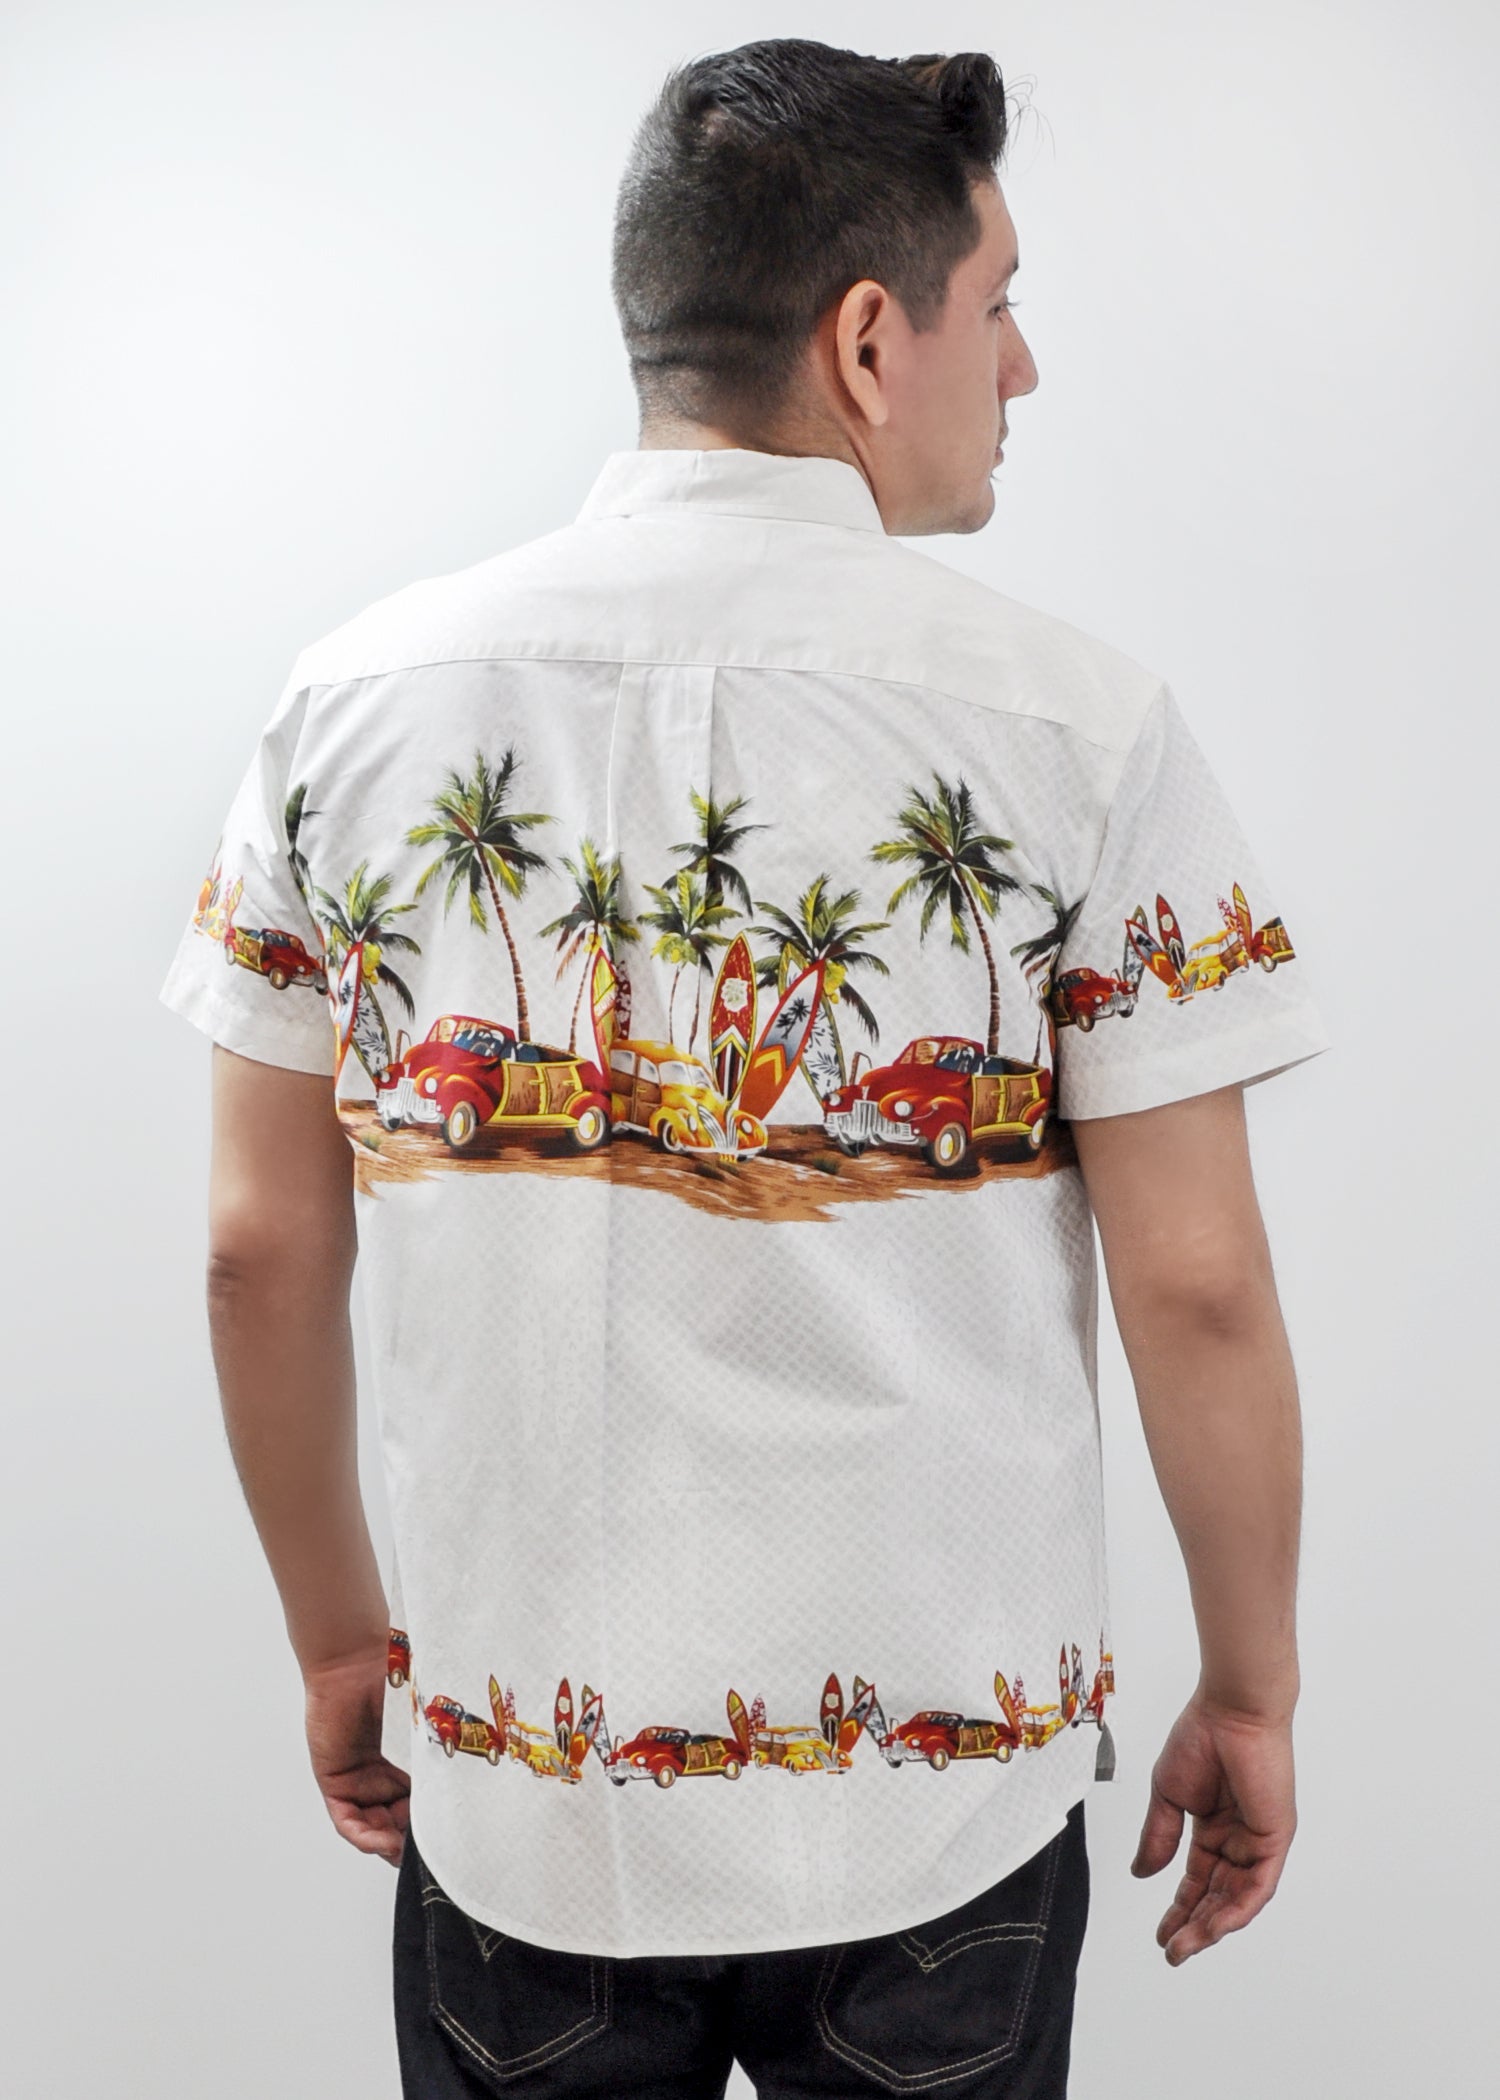 Model wearing High Surf Men's Hawaiian Shirt depicting Palm Trees, Cars and Surfboards in White. Back View.